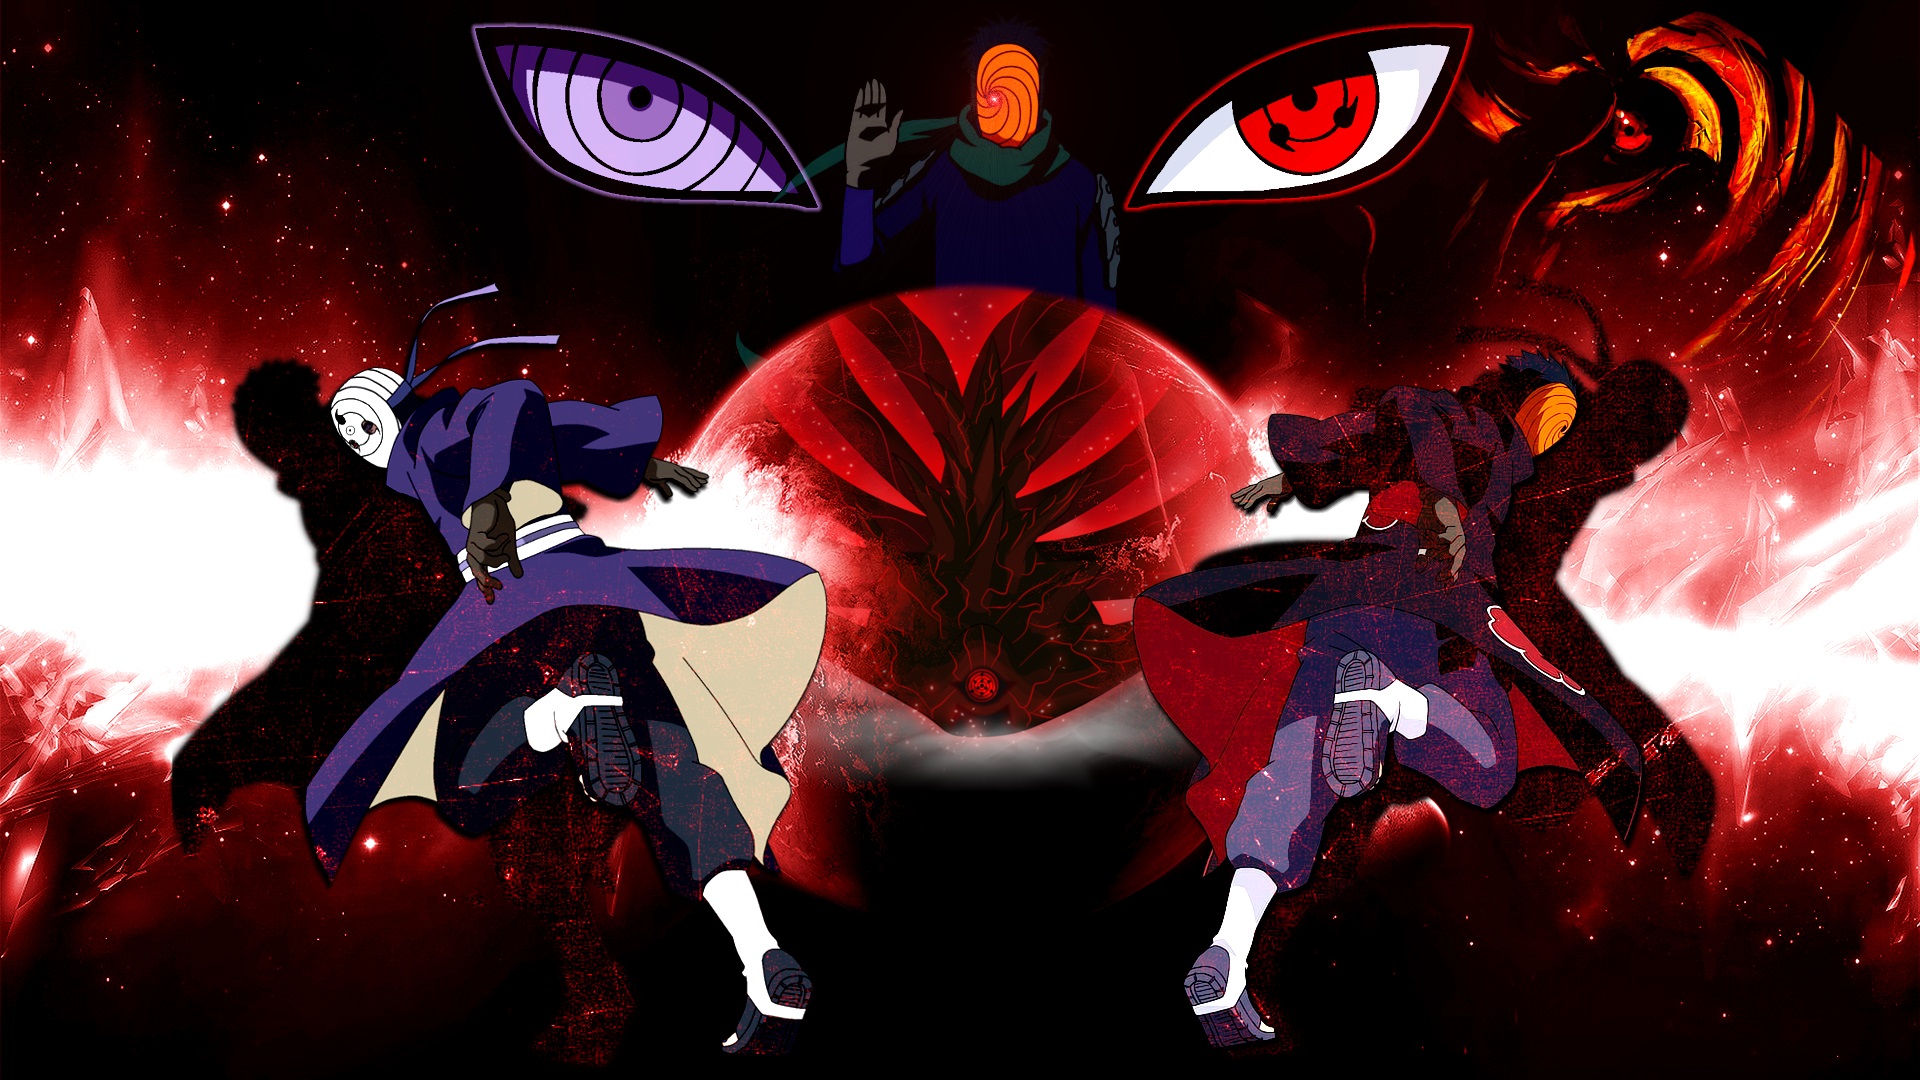 Free Download Obito Uchiha Quotes Quotesgram 1920x1080 For